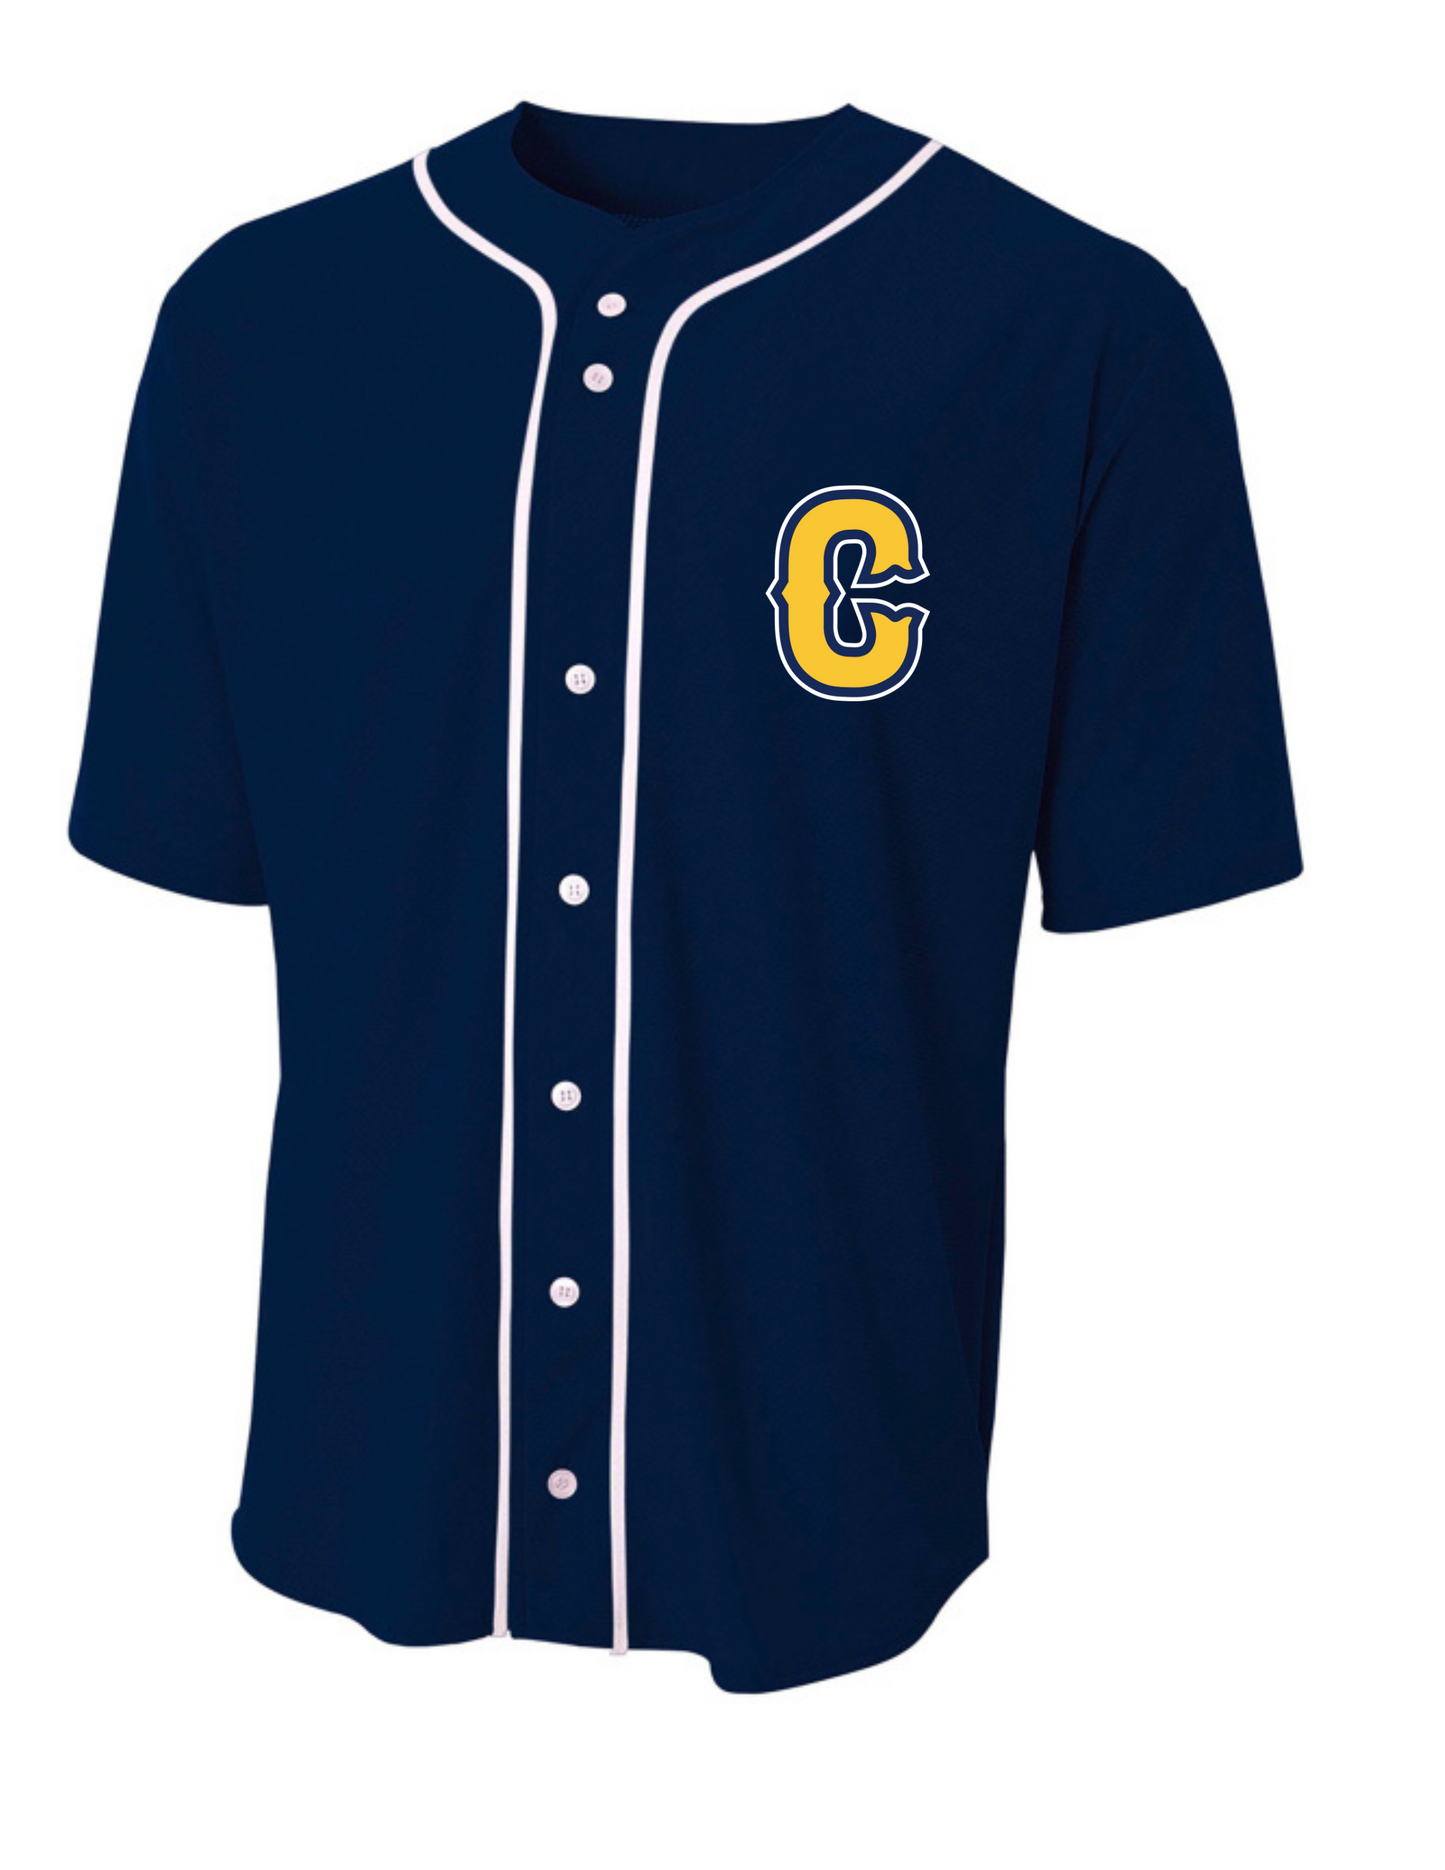 Replica Cohoes Button Up Jersey